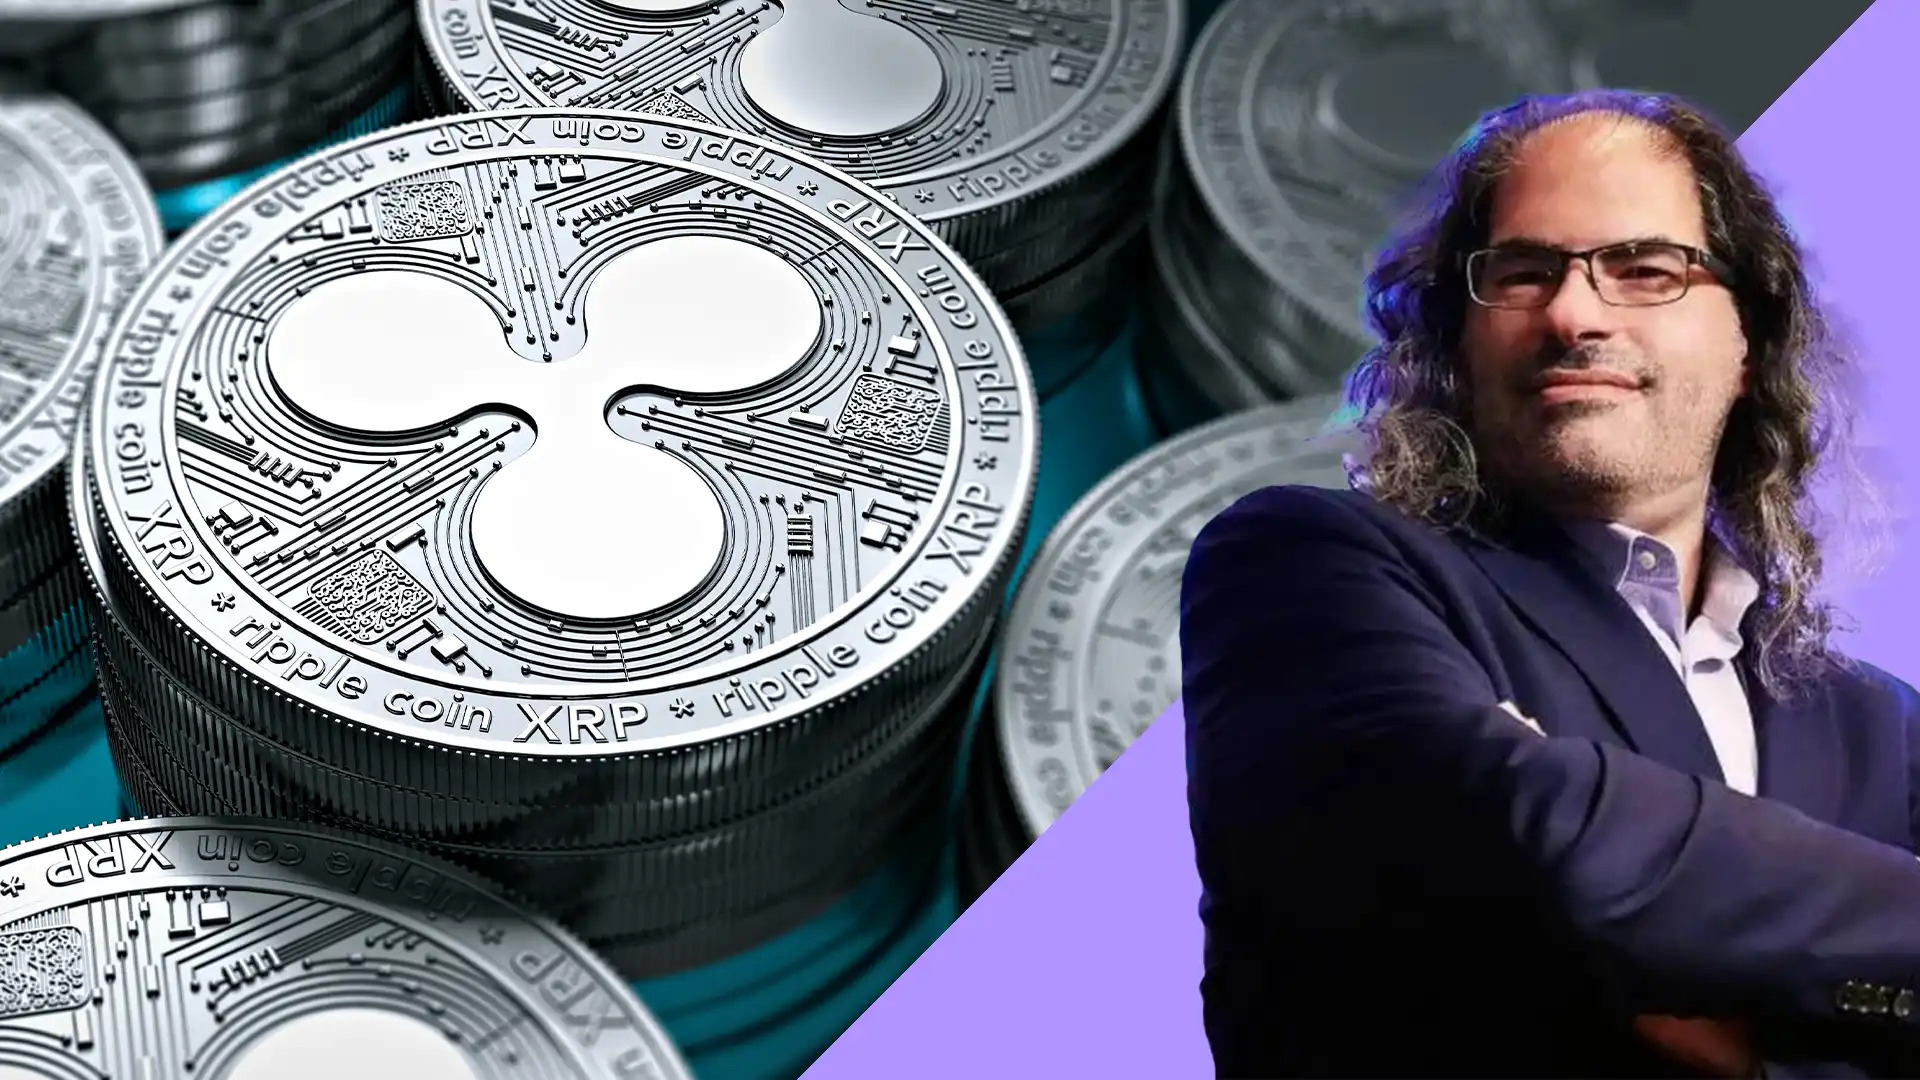 XRP Ledger architect expressing surprise and concern over recent SEC actions